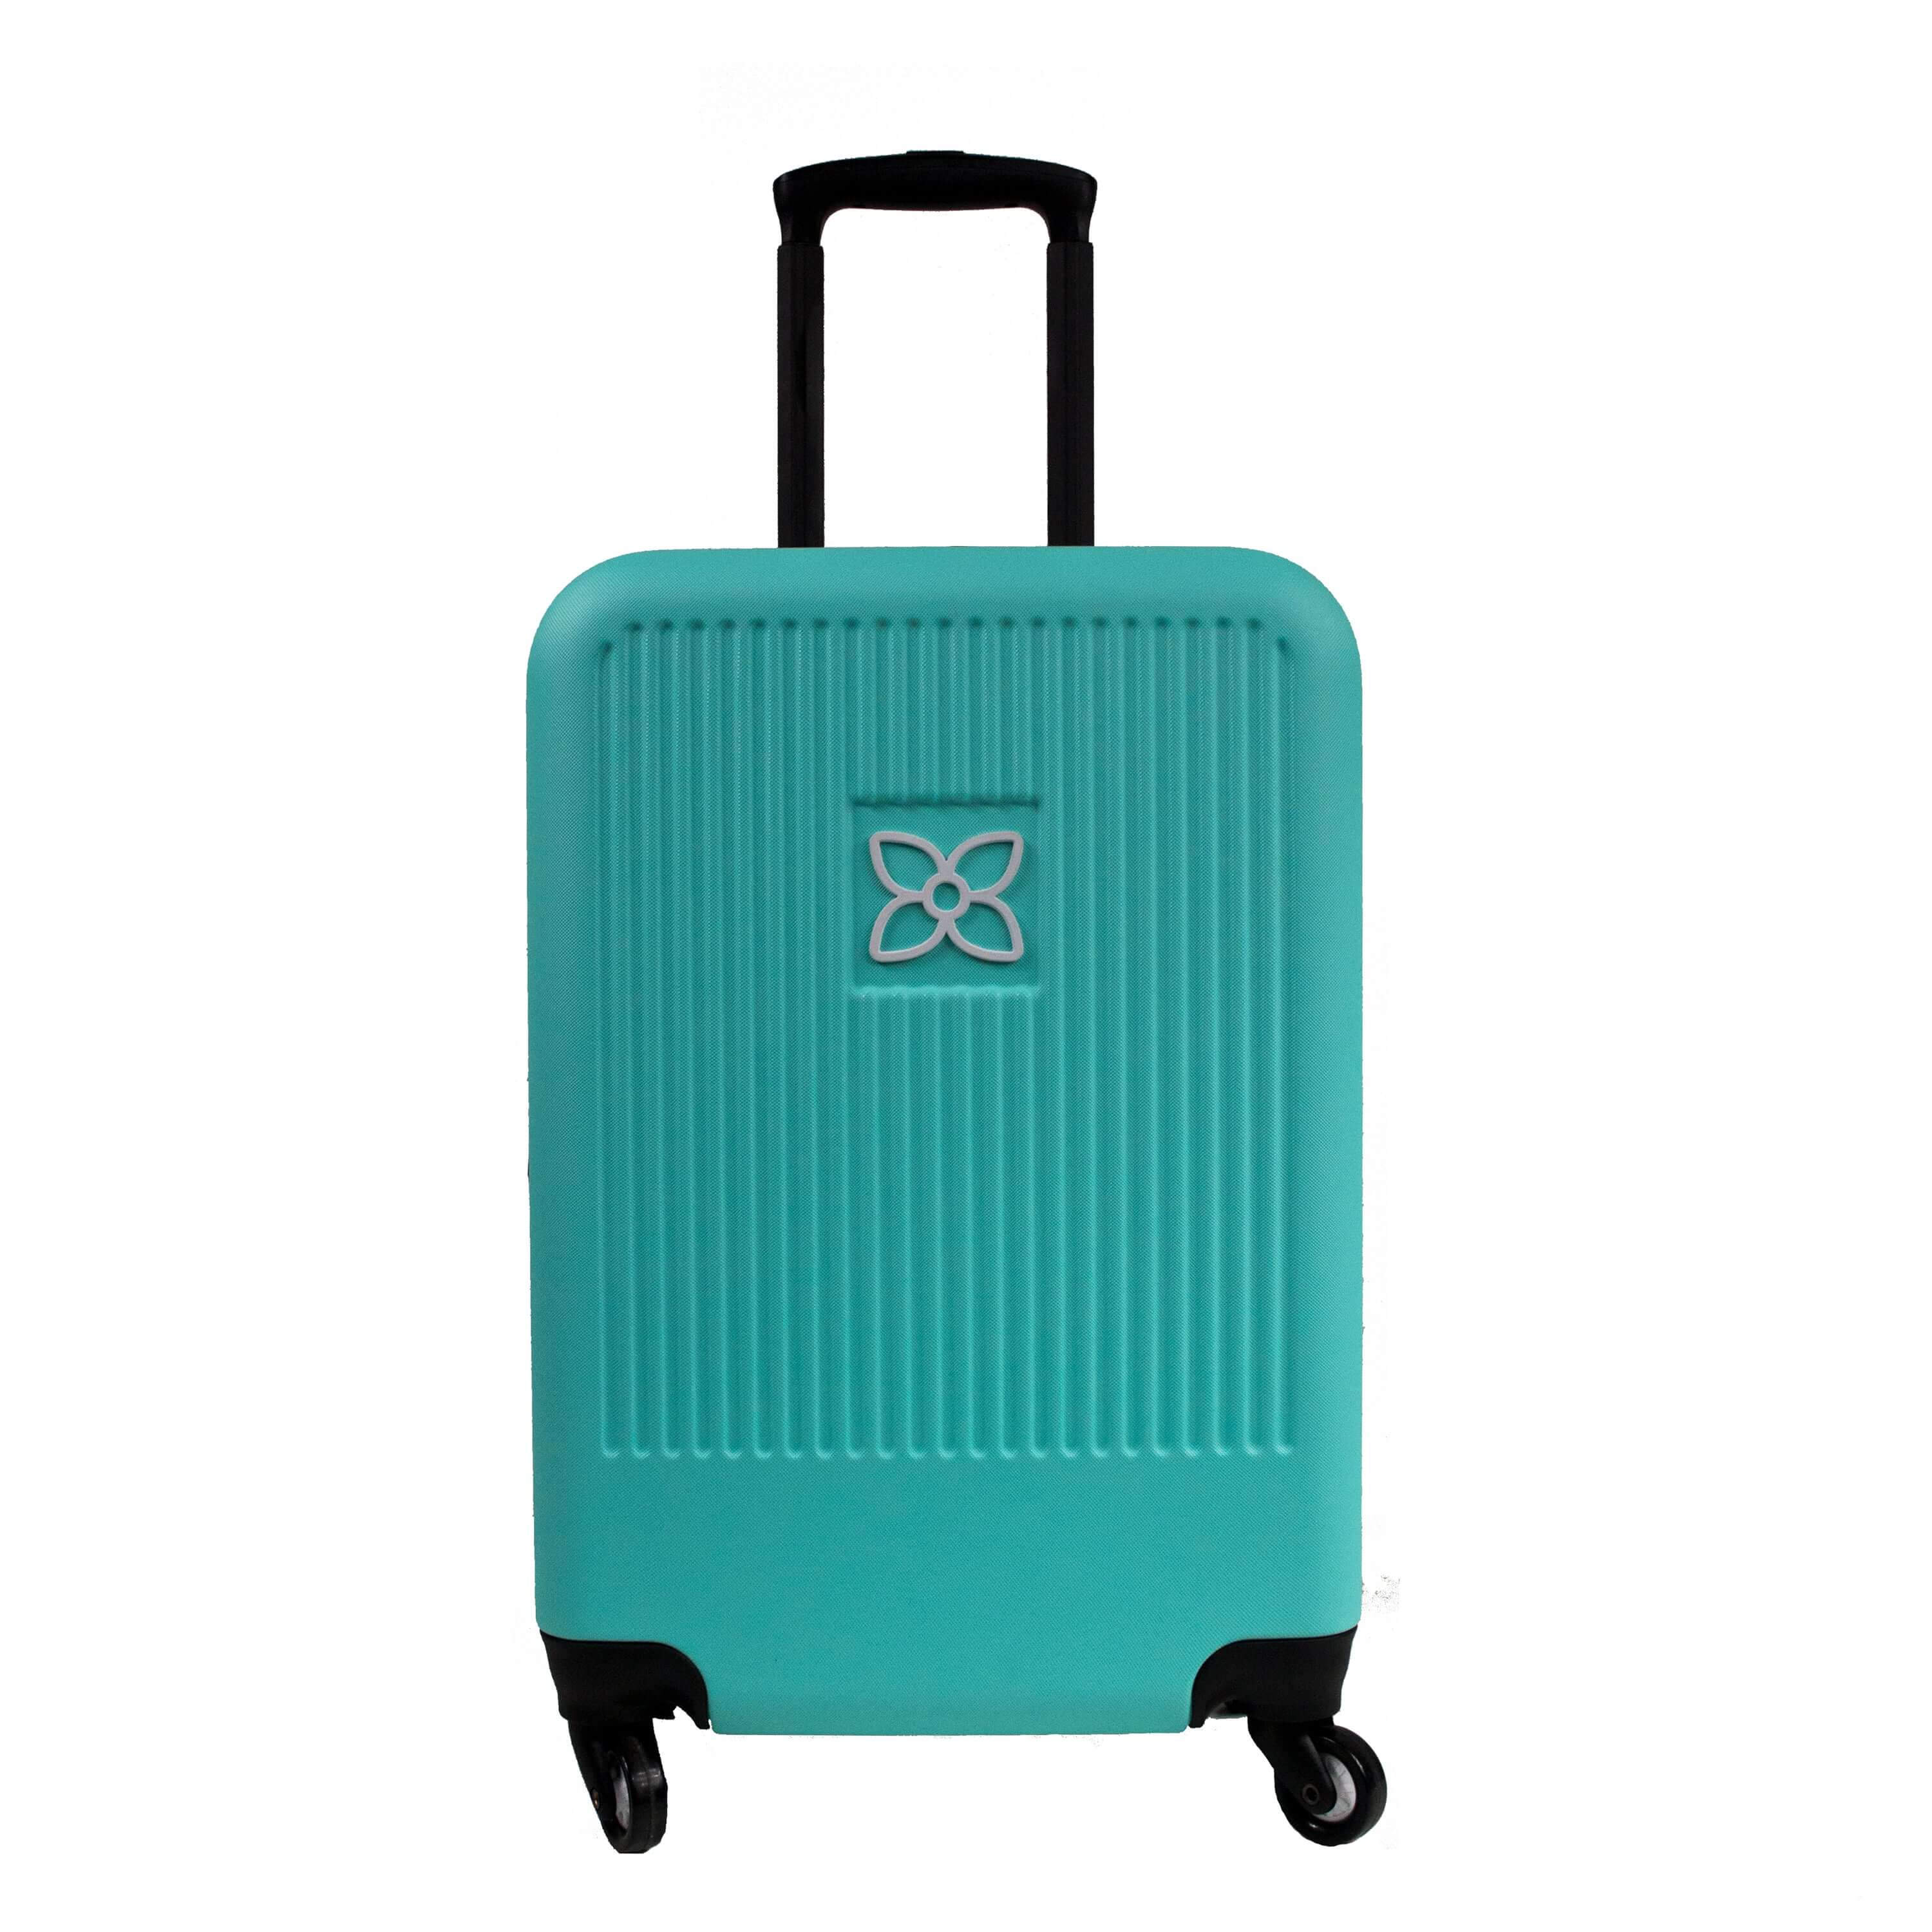 Flat front view of Sherpani hard-shell carry-on luggage, the Meridian in Caribe. Meridian features include a retractable luggage handle, uncrushable exterior, TSA-approved locking zippers and four 36-degree spinner wheels. The Caribe colorway is two-toned with the front of the suitcase in turquoise blue and the back in classic black. 